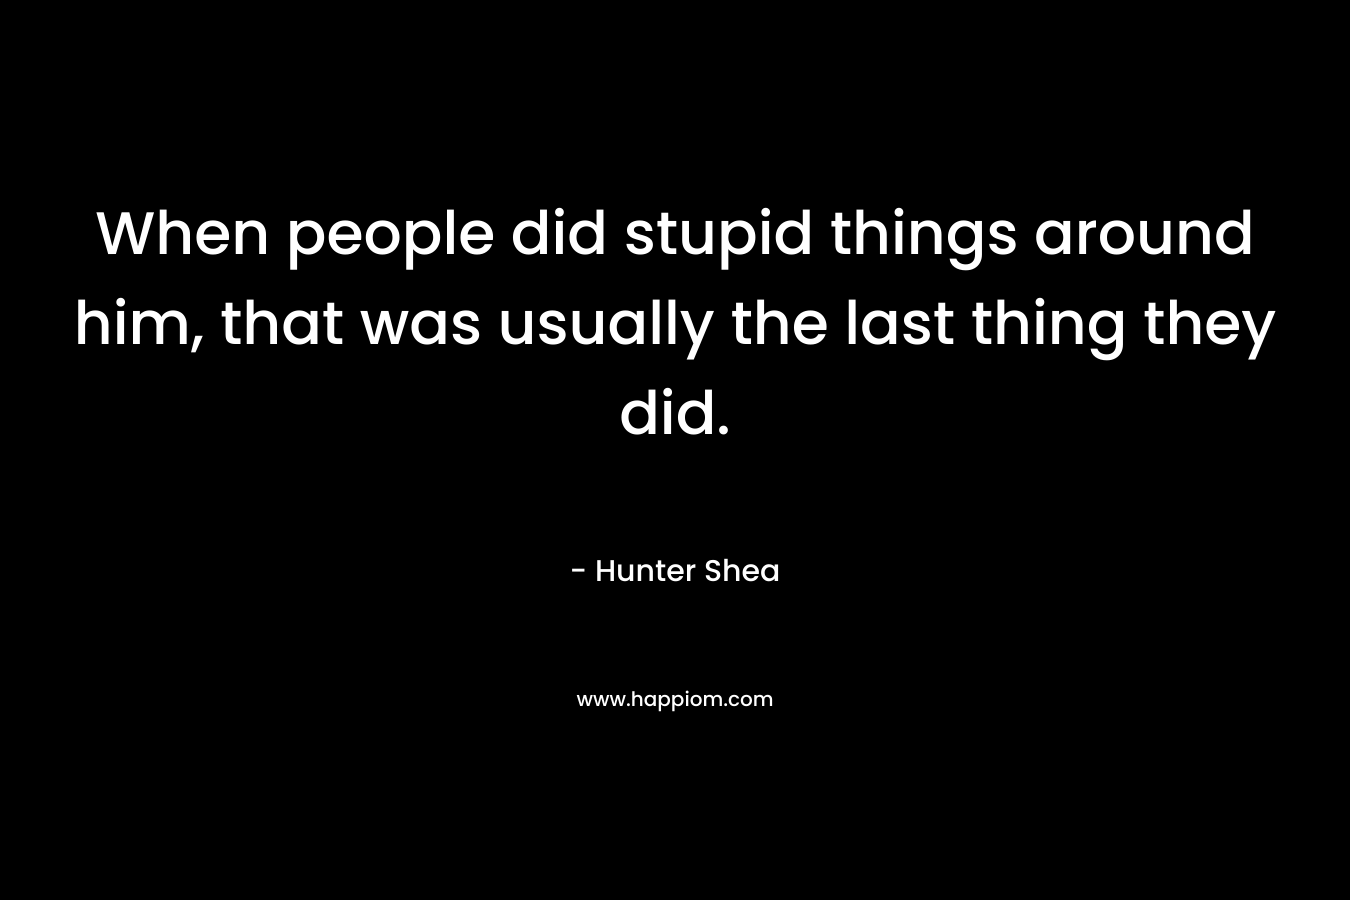 When people did stupid things around him, that was usually the last thing they did. – Hunter Shea